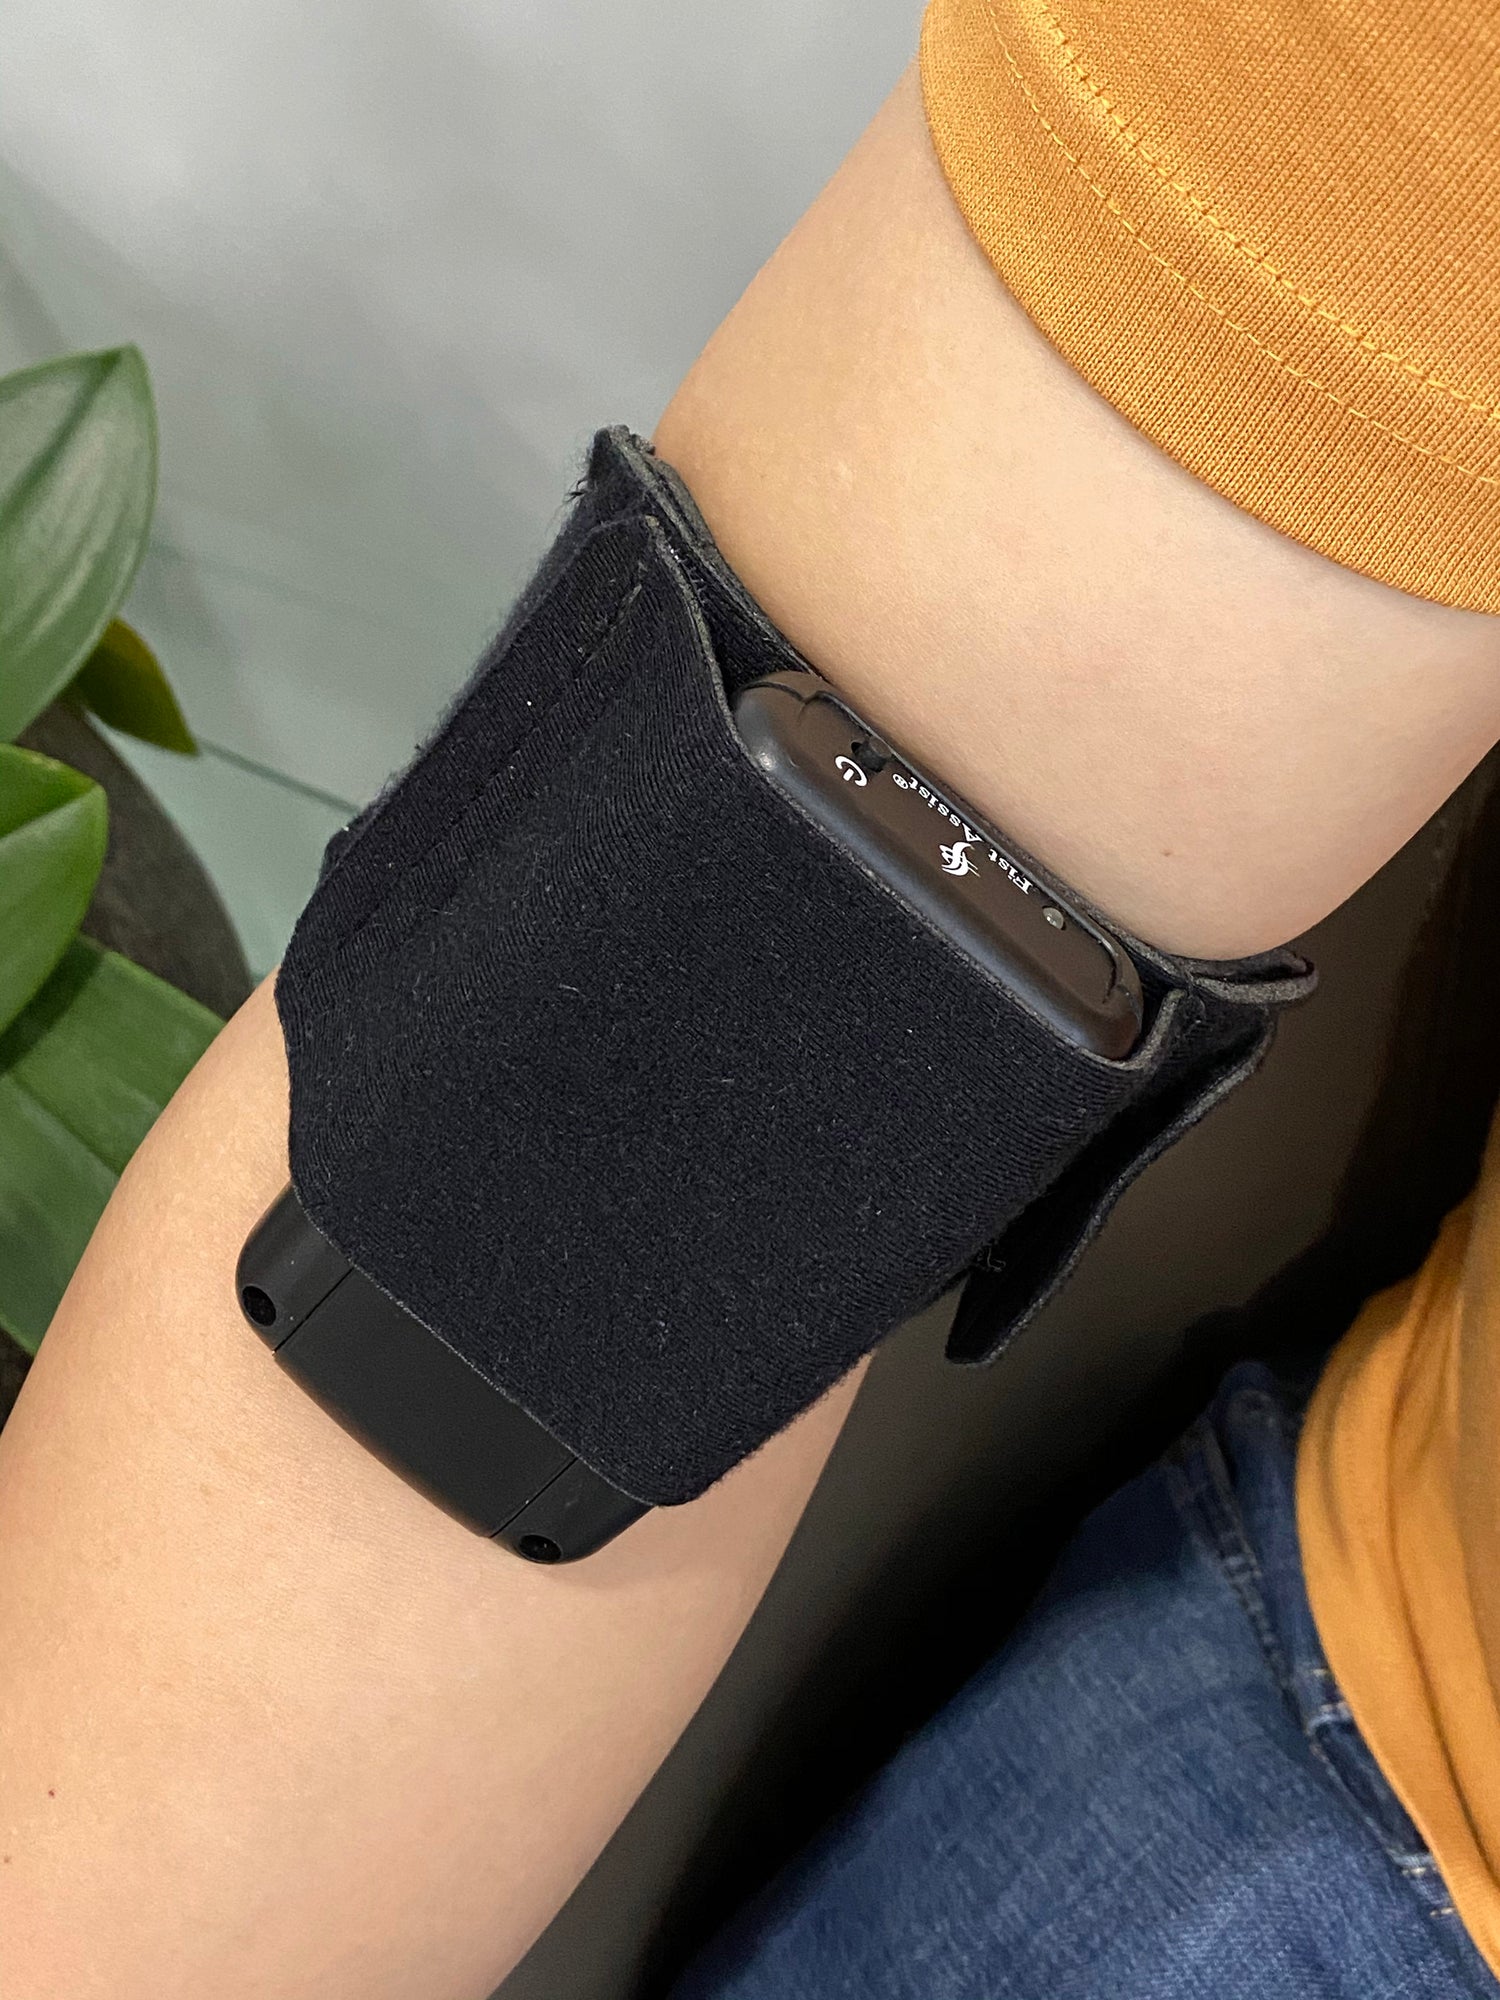 Fist Assist FA-1: Arm Massager Device for Pain